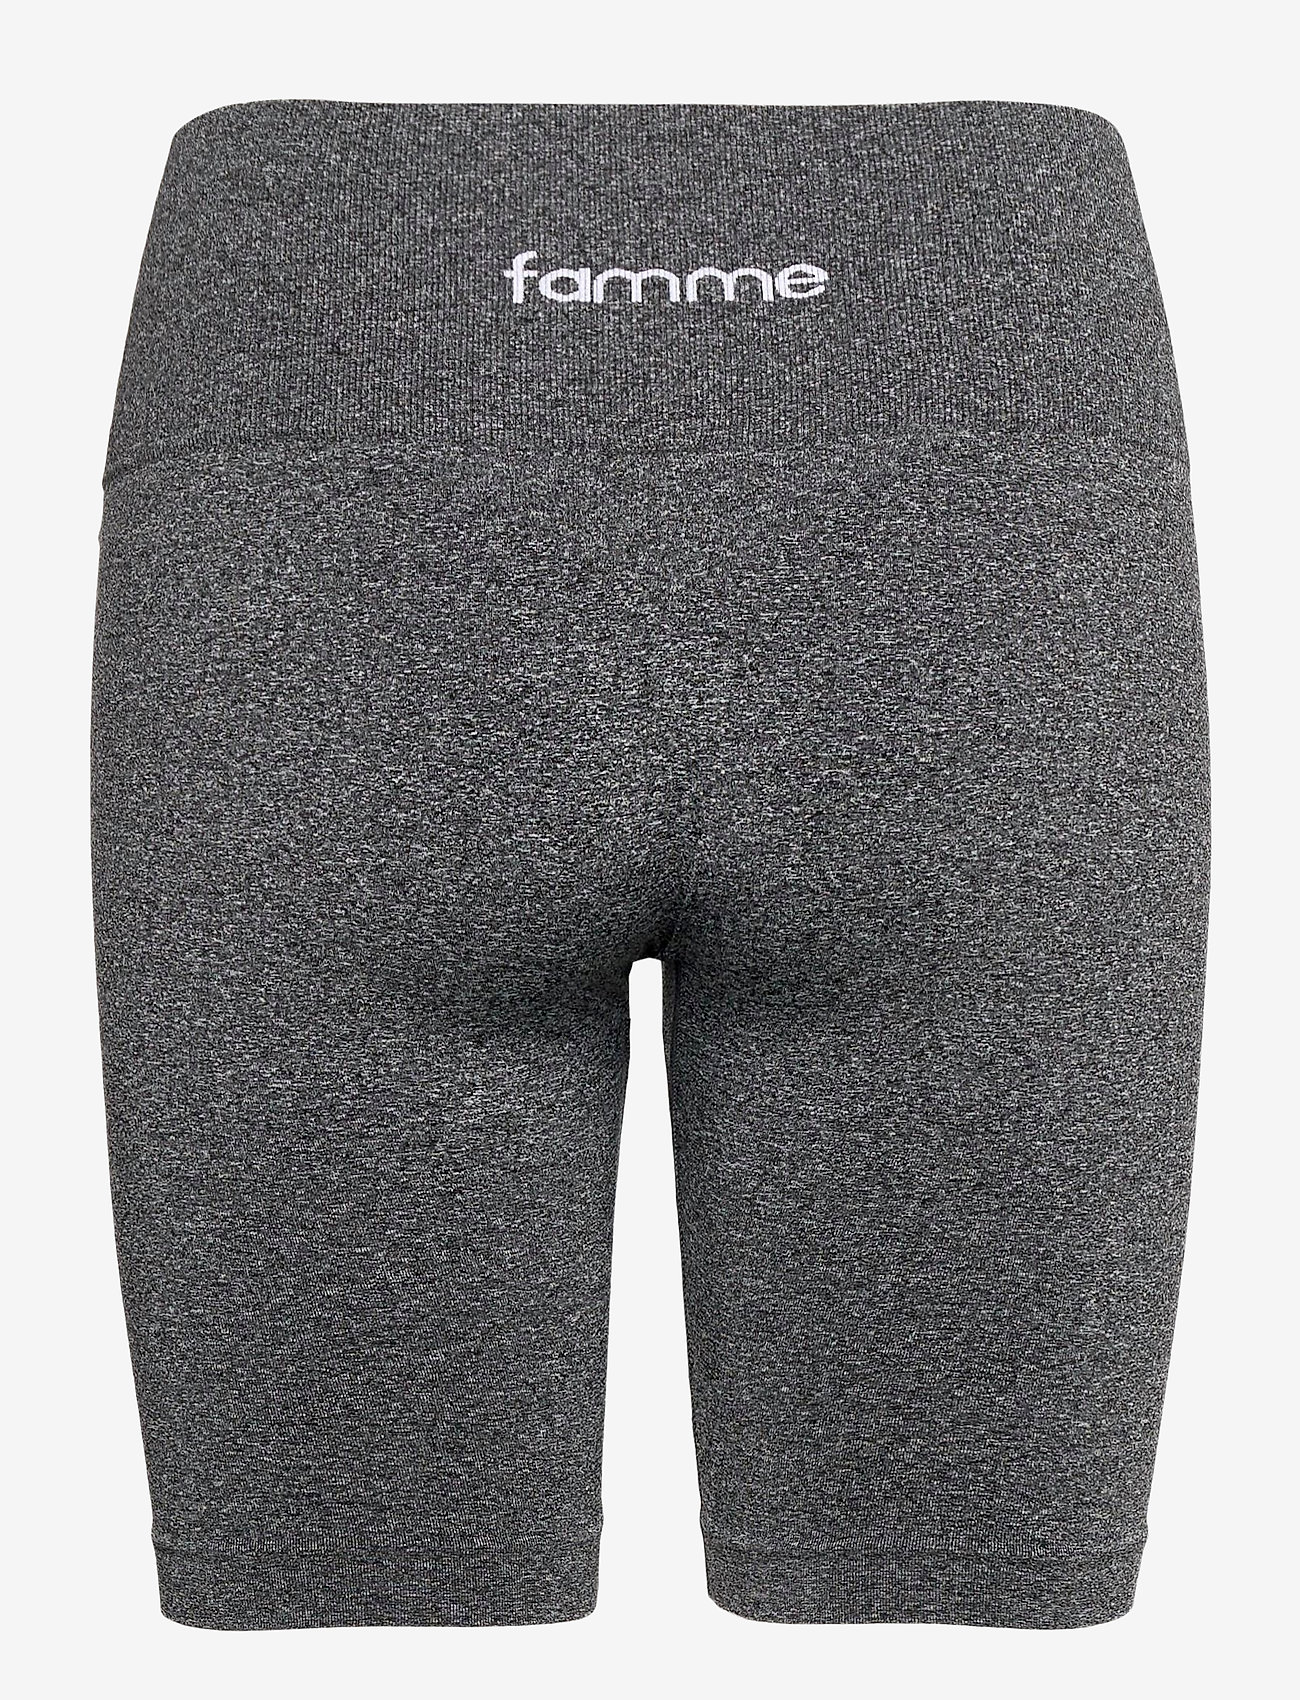 Famme - Fit Shorts - running & training tights - black - 1